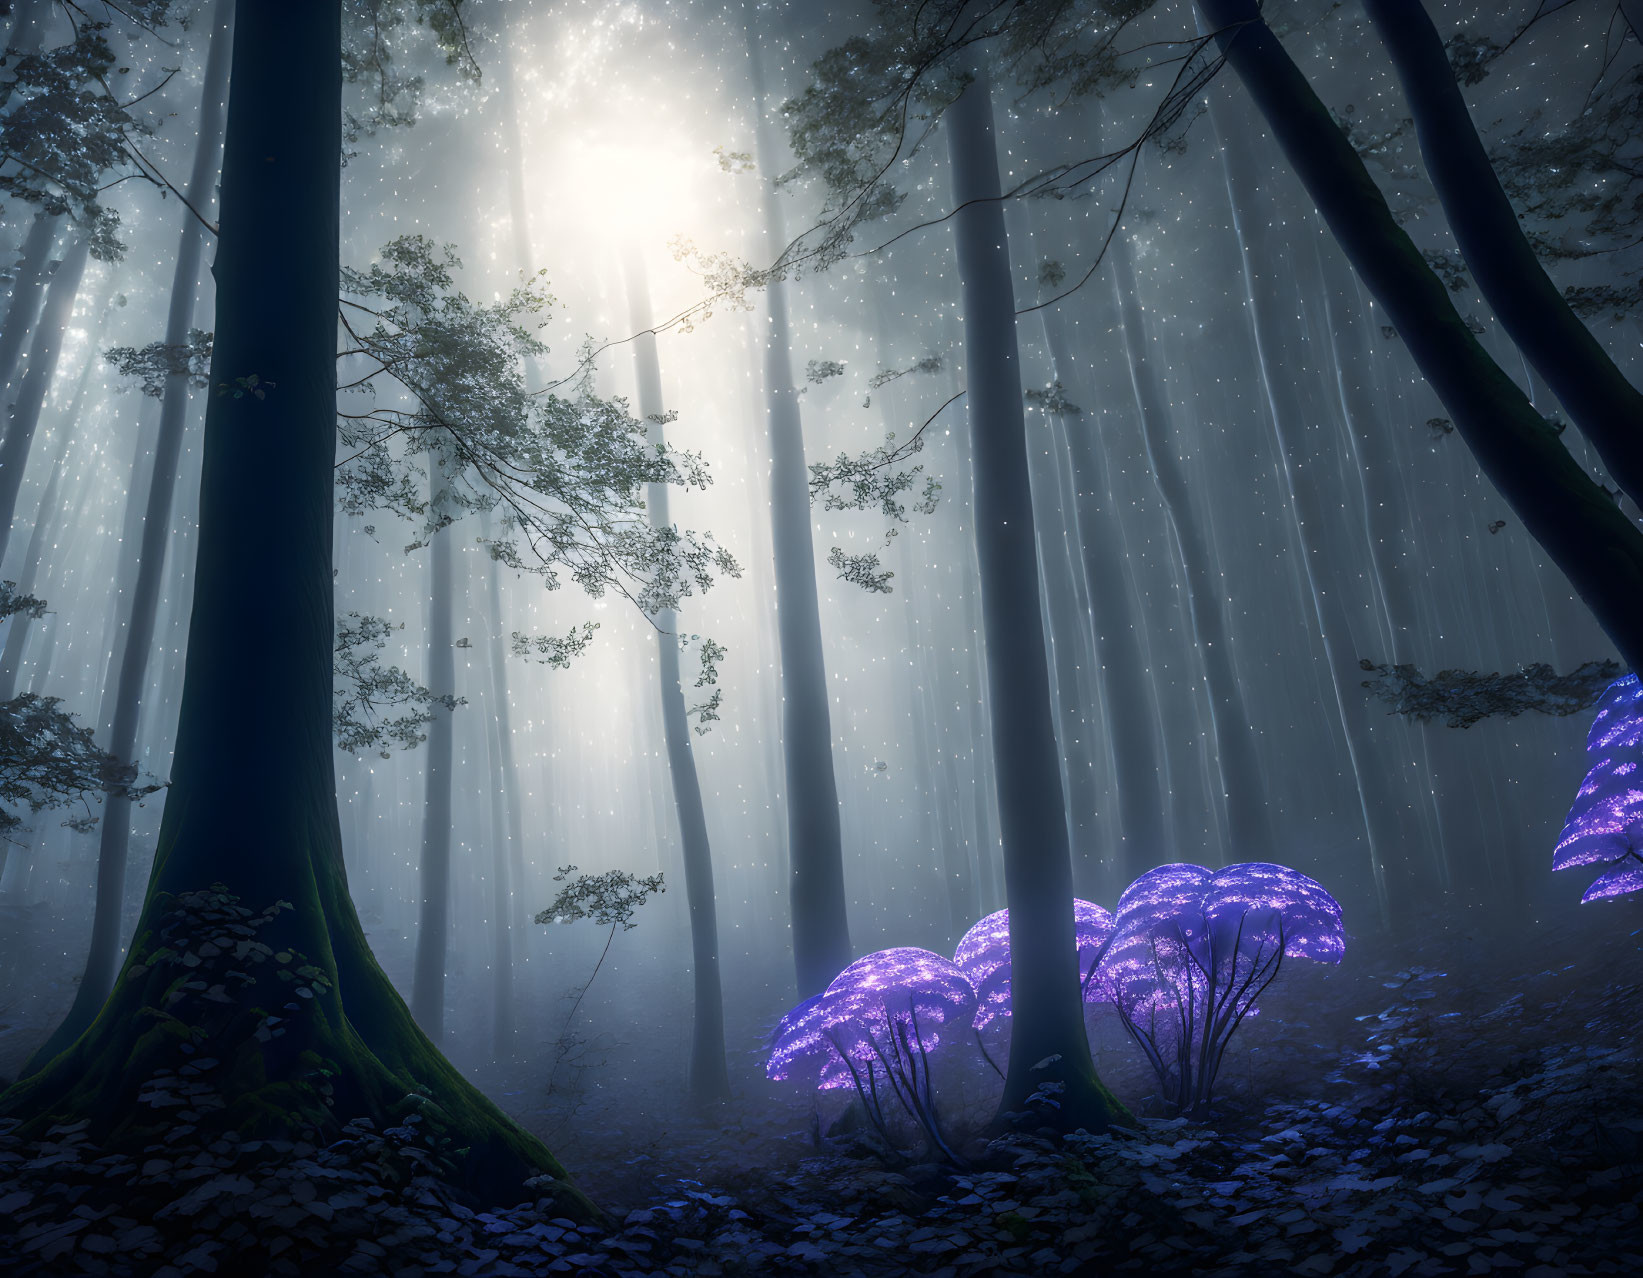 Enchanting Misty Forest with Tall Trees and Glowing Purple Mushrooms